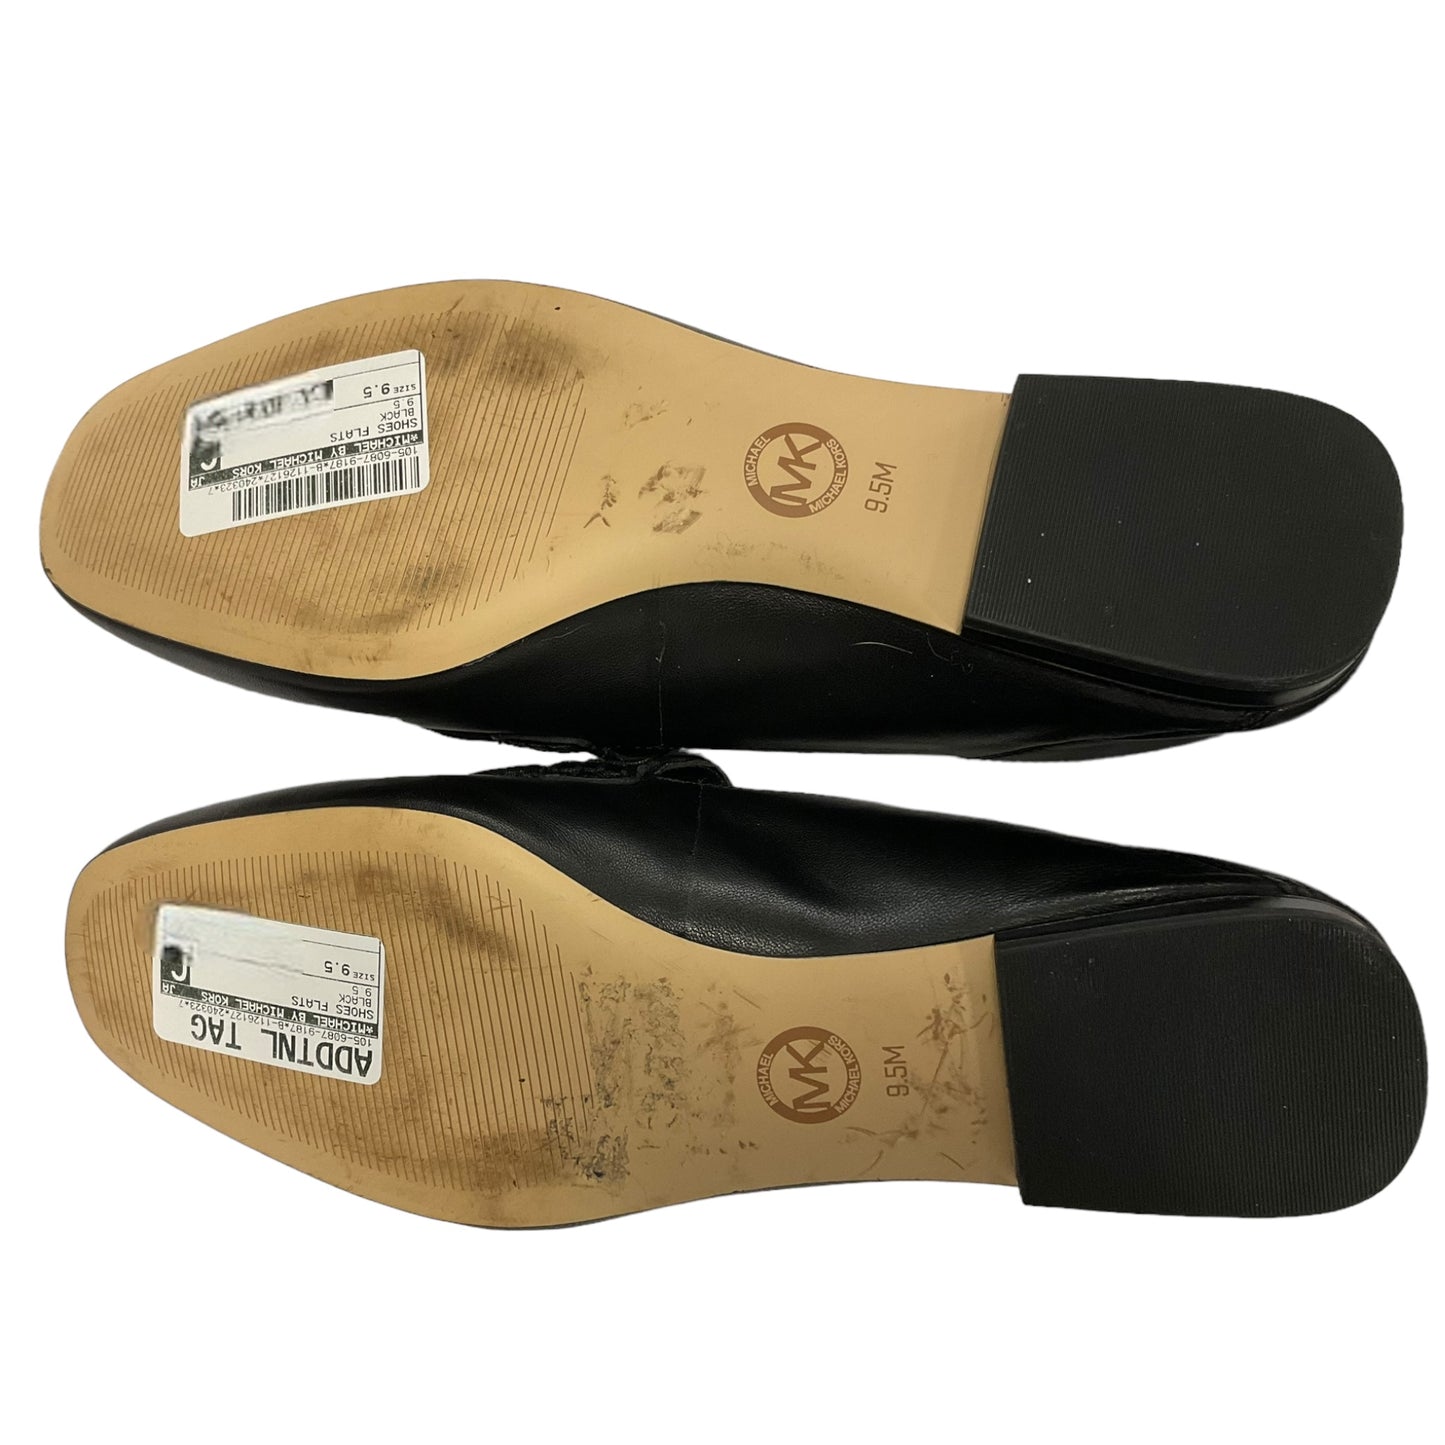 Shoes Flats By Michael By Michael Kors  Size: 9.5